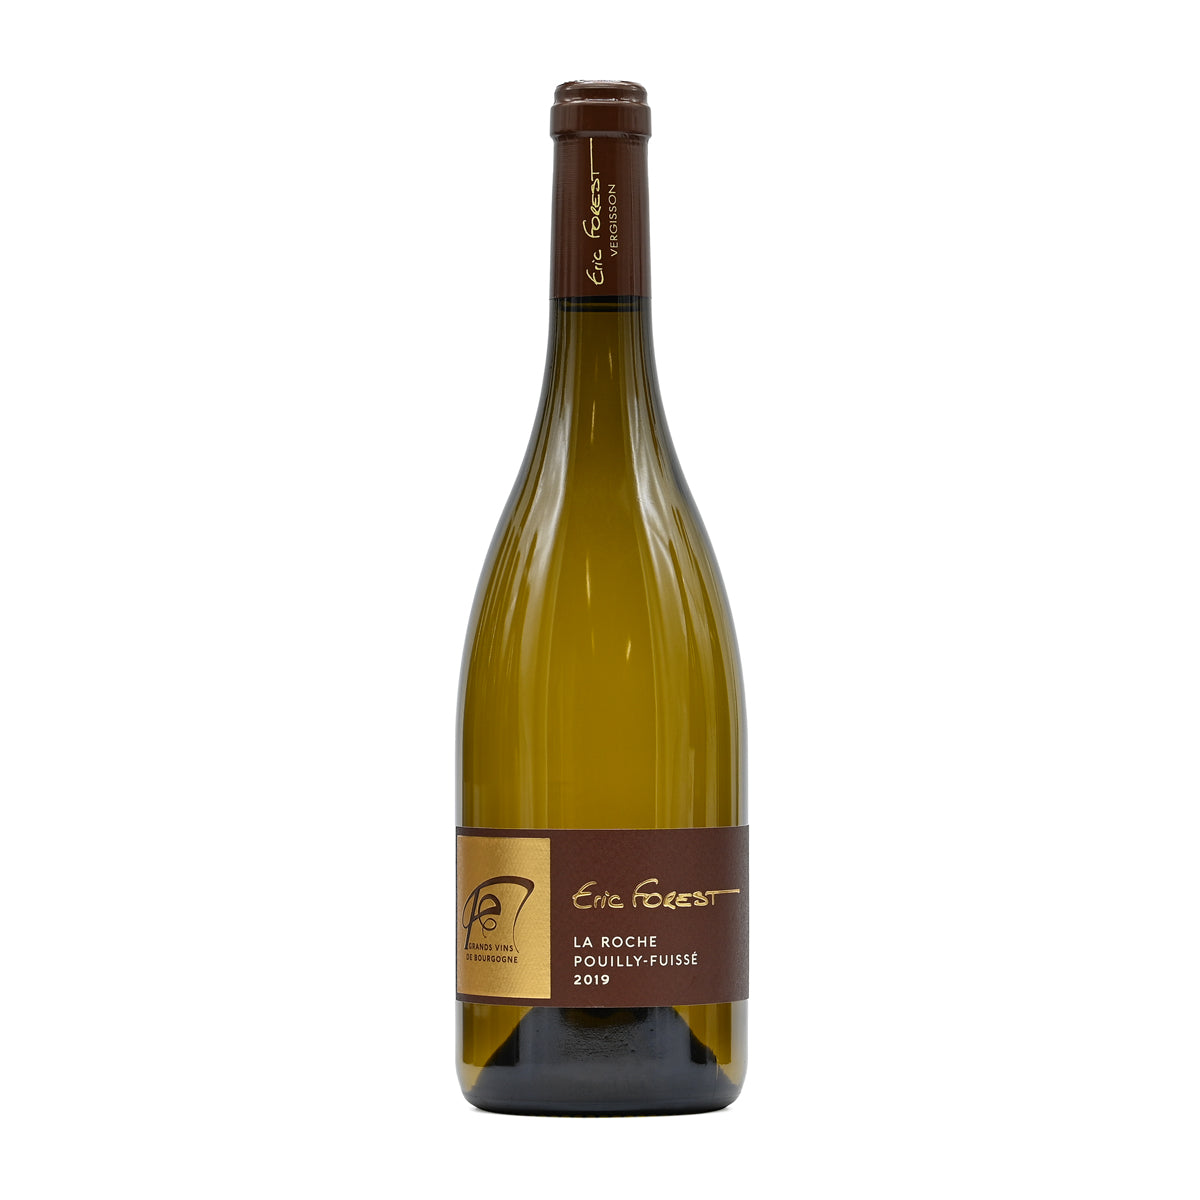 Domaine Eric Forest Pouilly-Fuisse La Roche 2019, 750ml French white wine, made from Chardonnay; from Pouilly-Fuisse, Burgundy, France – GDV Fine Wines, Hong Kong